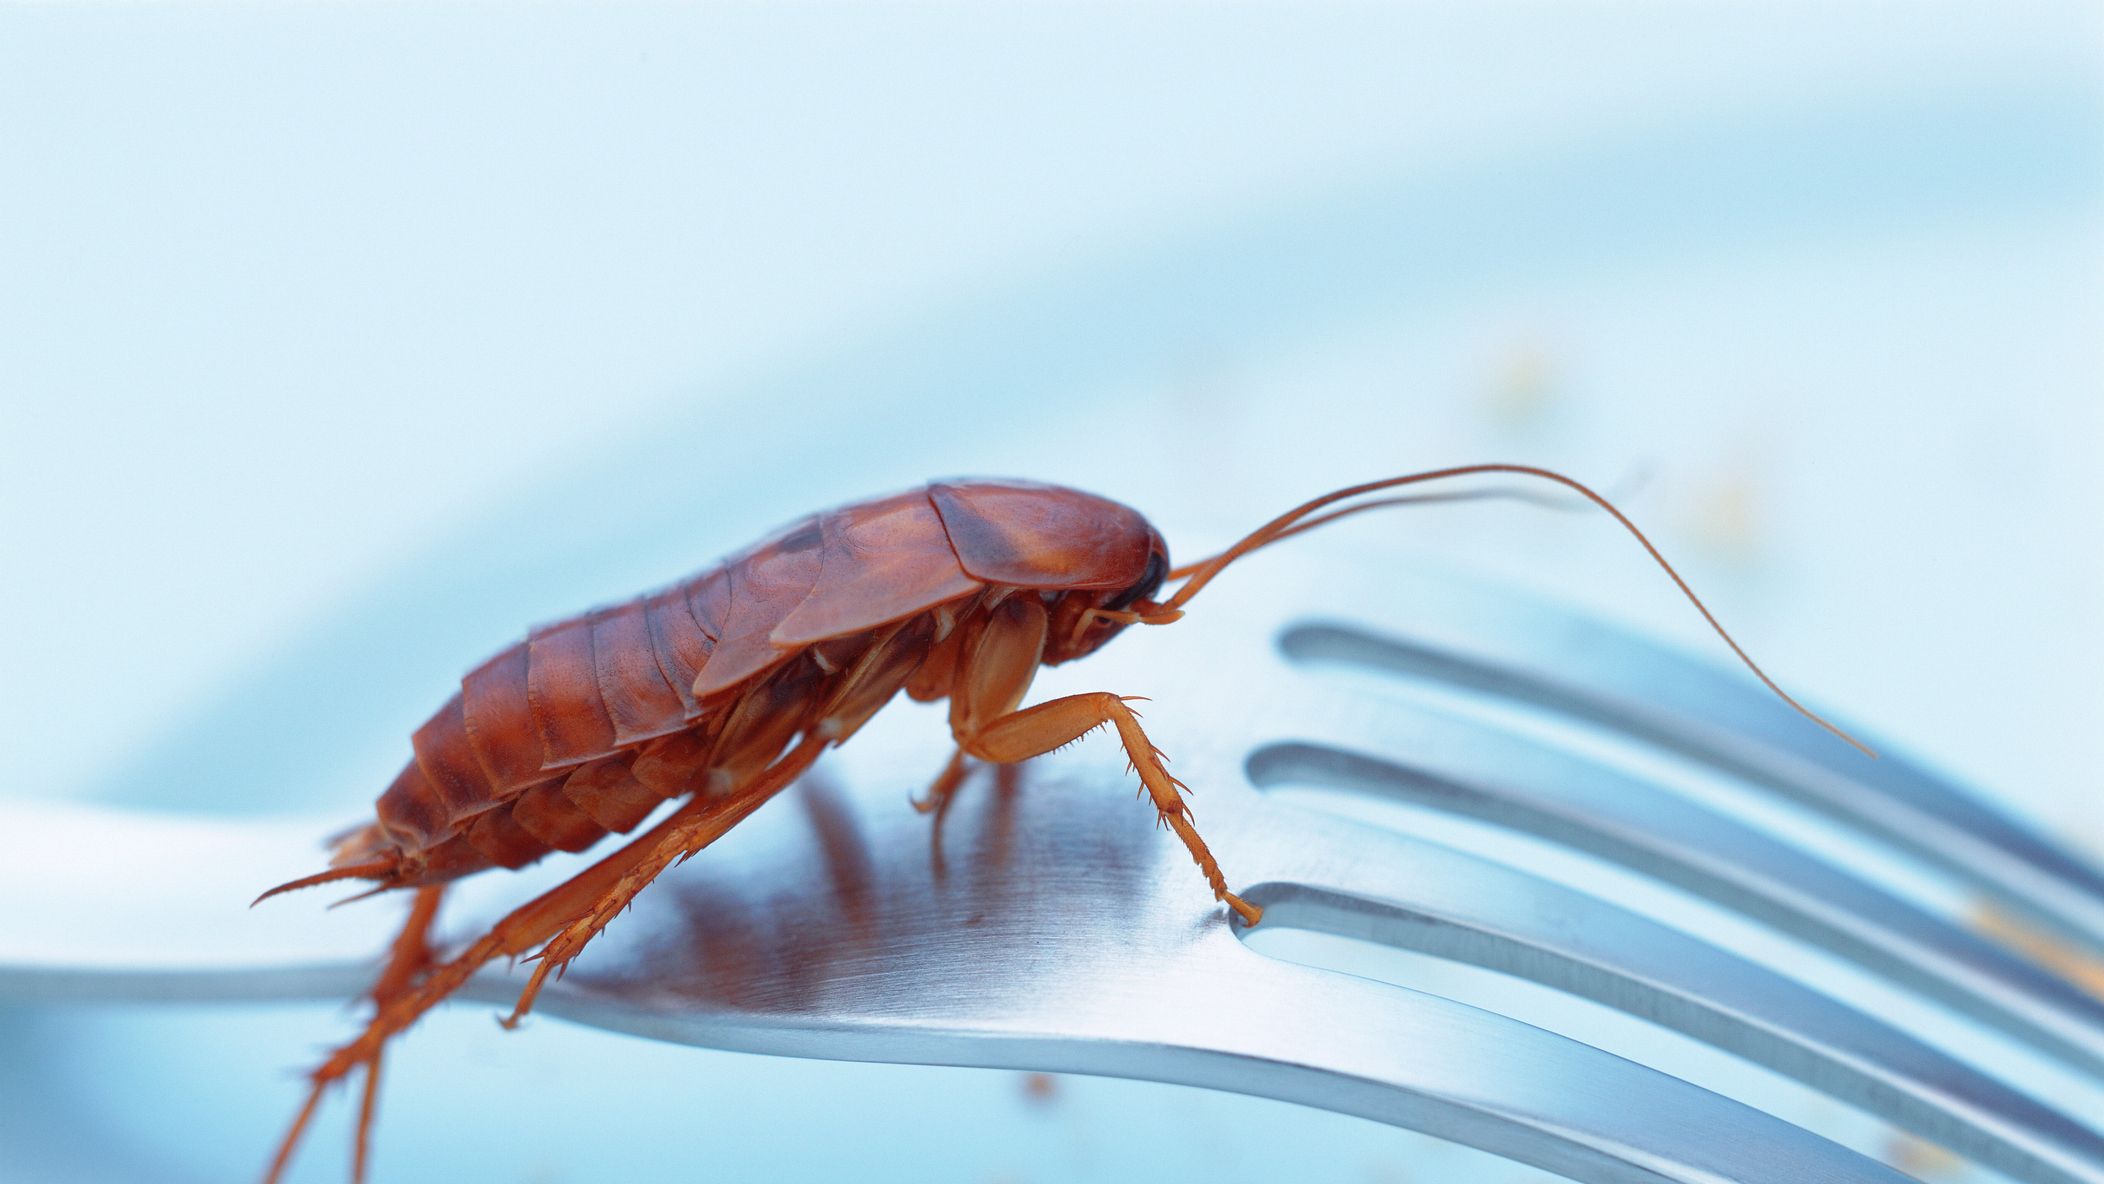 Do Cockroaches Bite Humans? - How Cockroaches Can Spread Disease